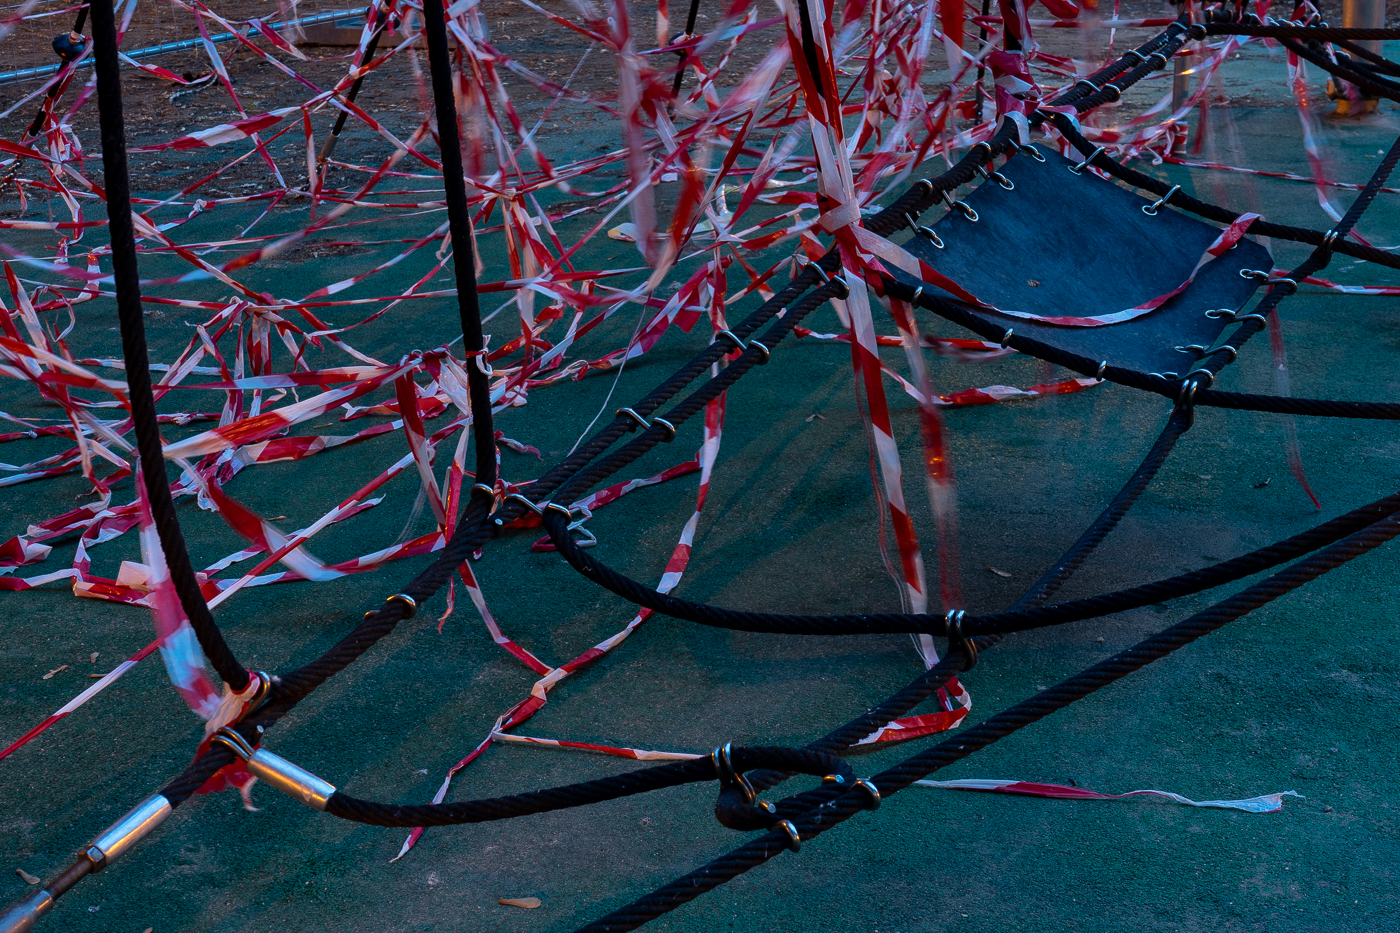 Red-white striped vinyl safety tapes amongst the ropes of climbing sphere,Trampoline park in Bikas Park, 2020. March 16 - May 18. 11th district of Budapest, Hungary. / Bikás Trambulinpark, Budapest